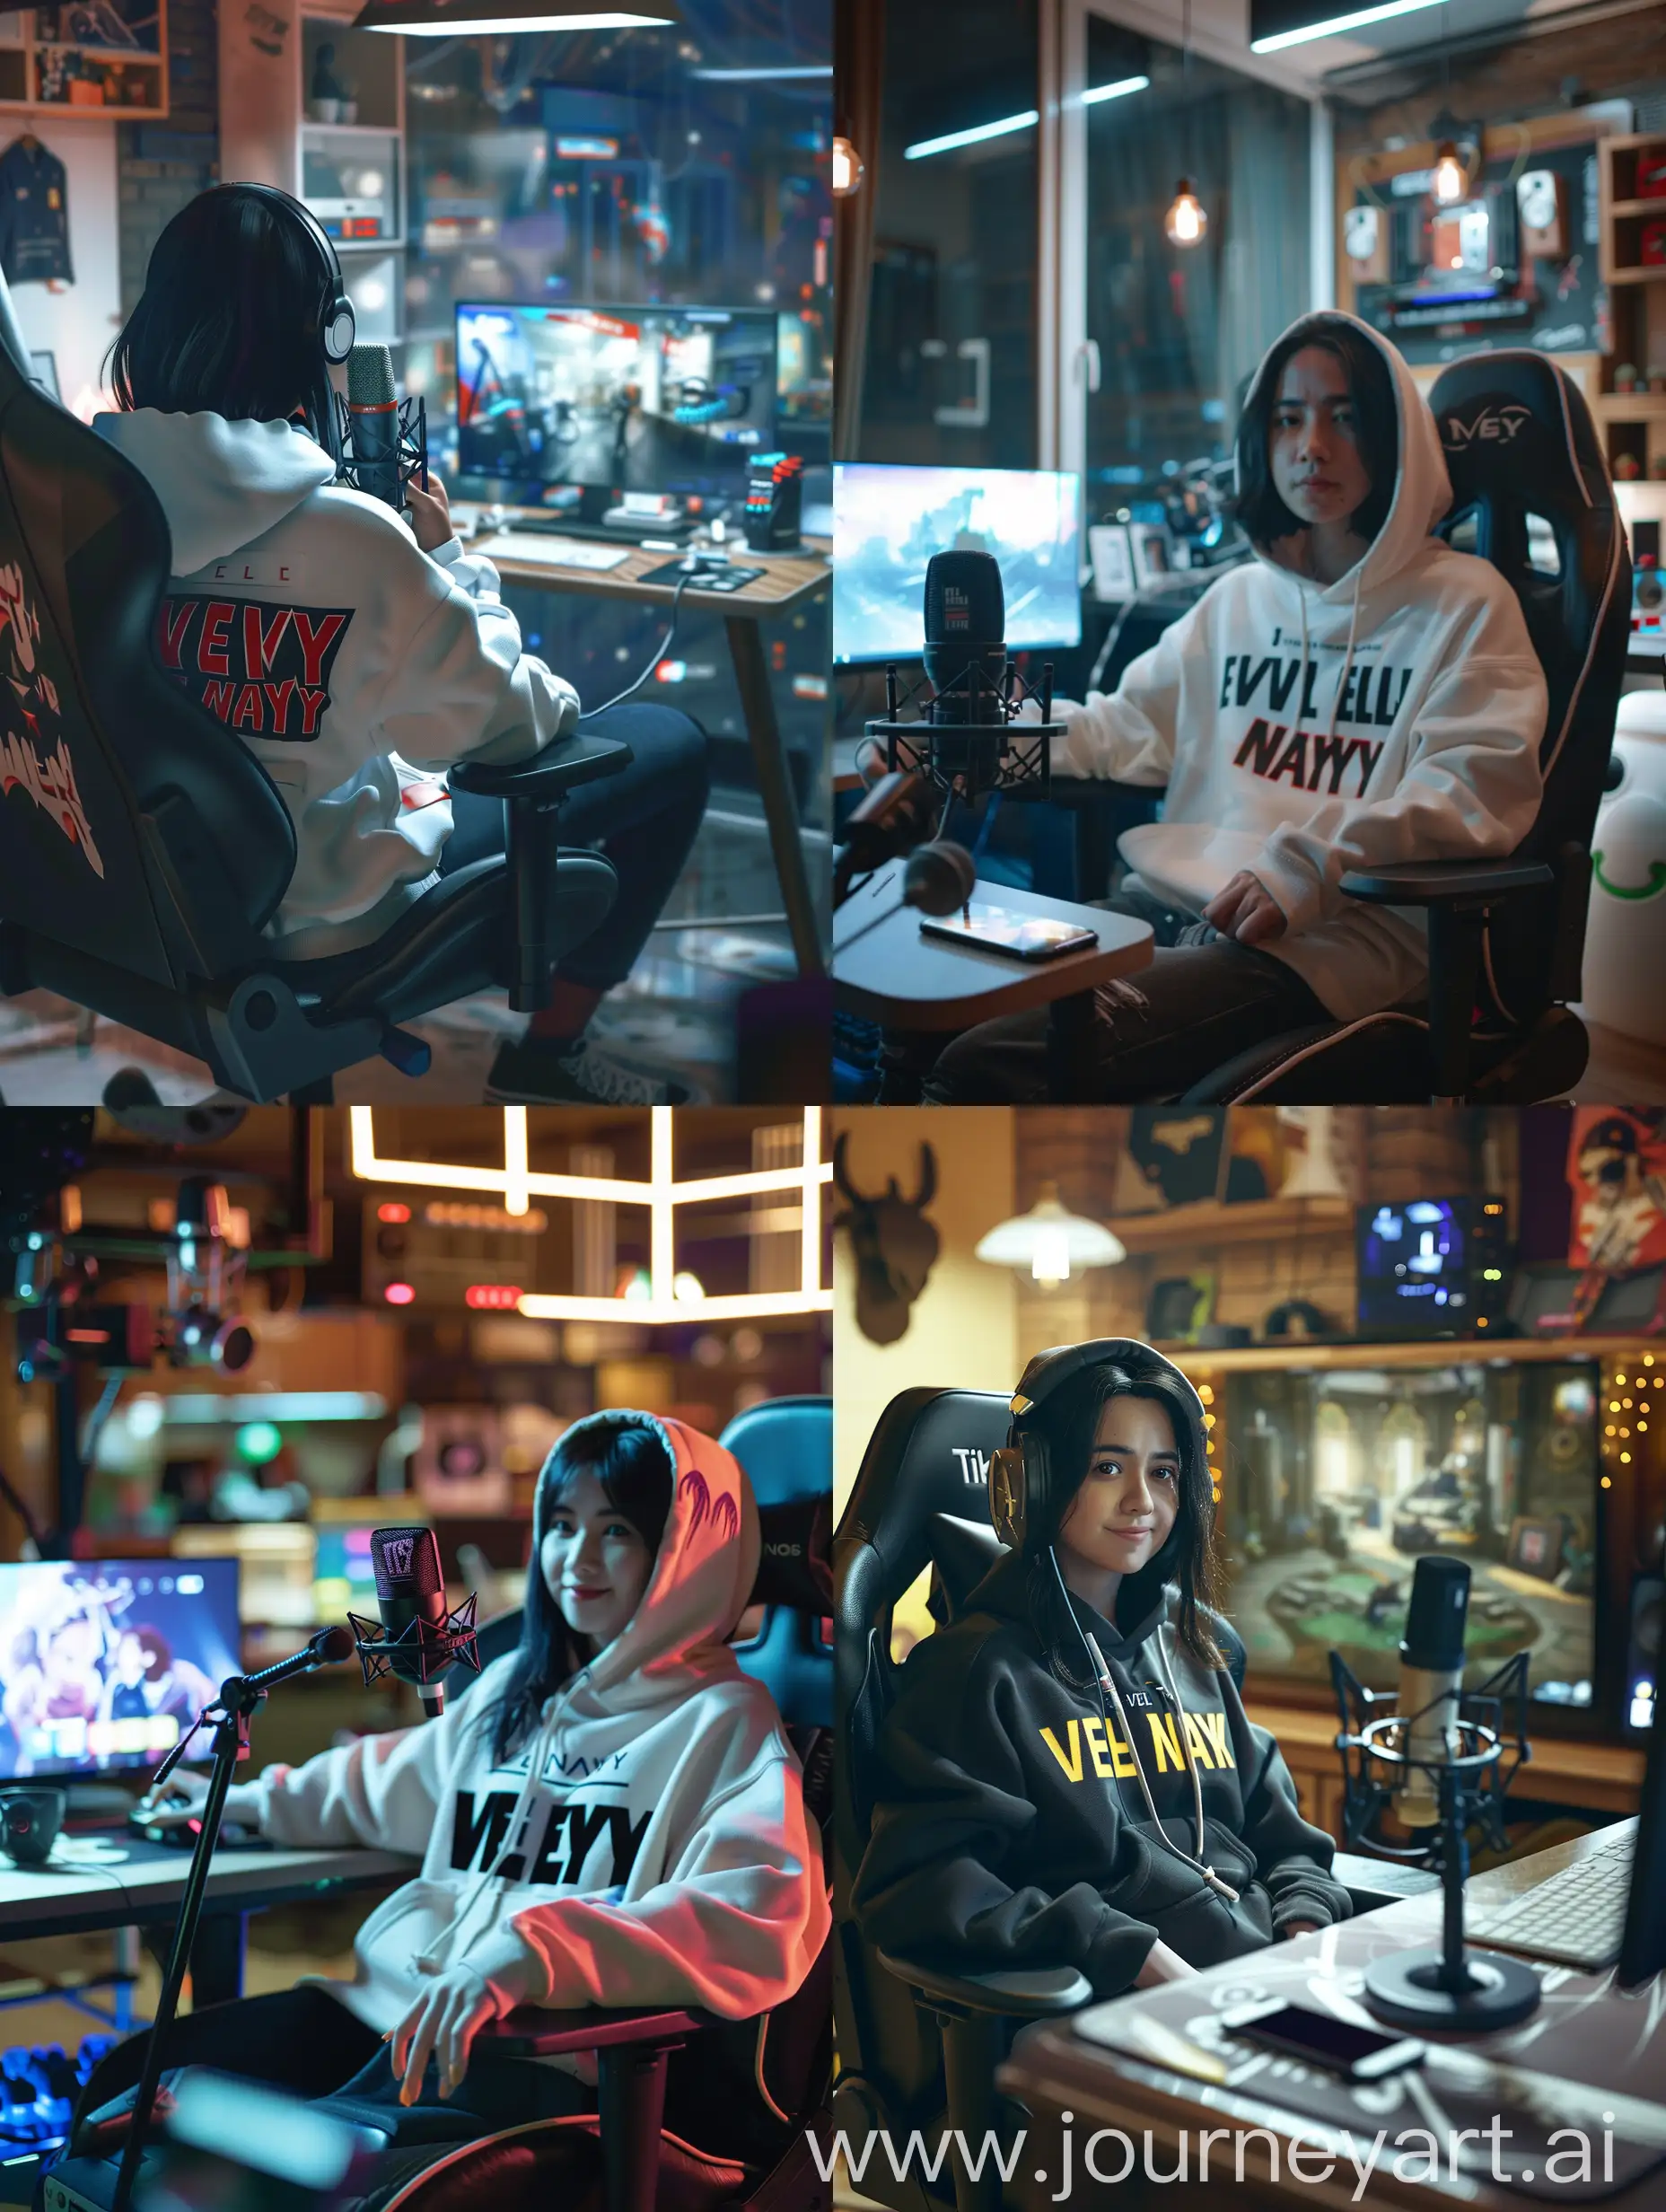 Indonesian-Woman-Podcasting-on-TikTok-in-VEL-NAYS-Hoodie